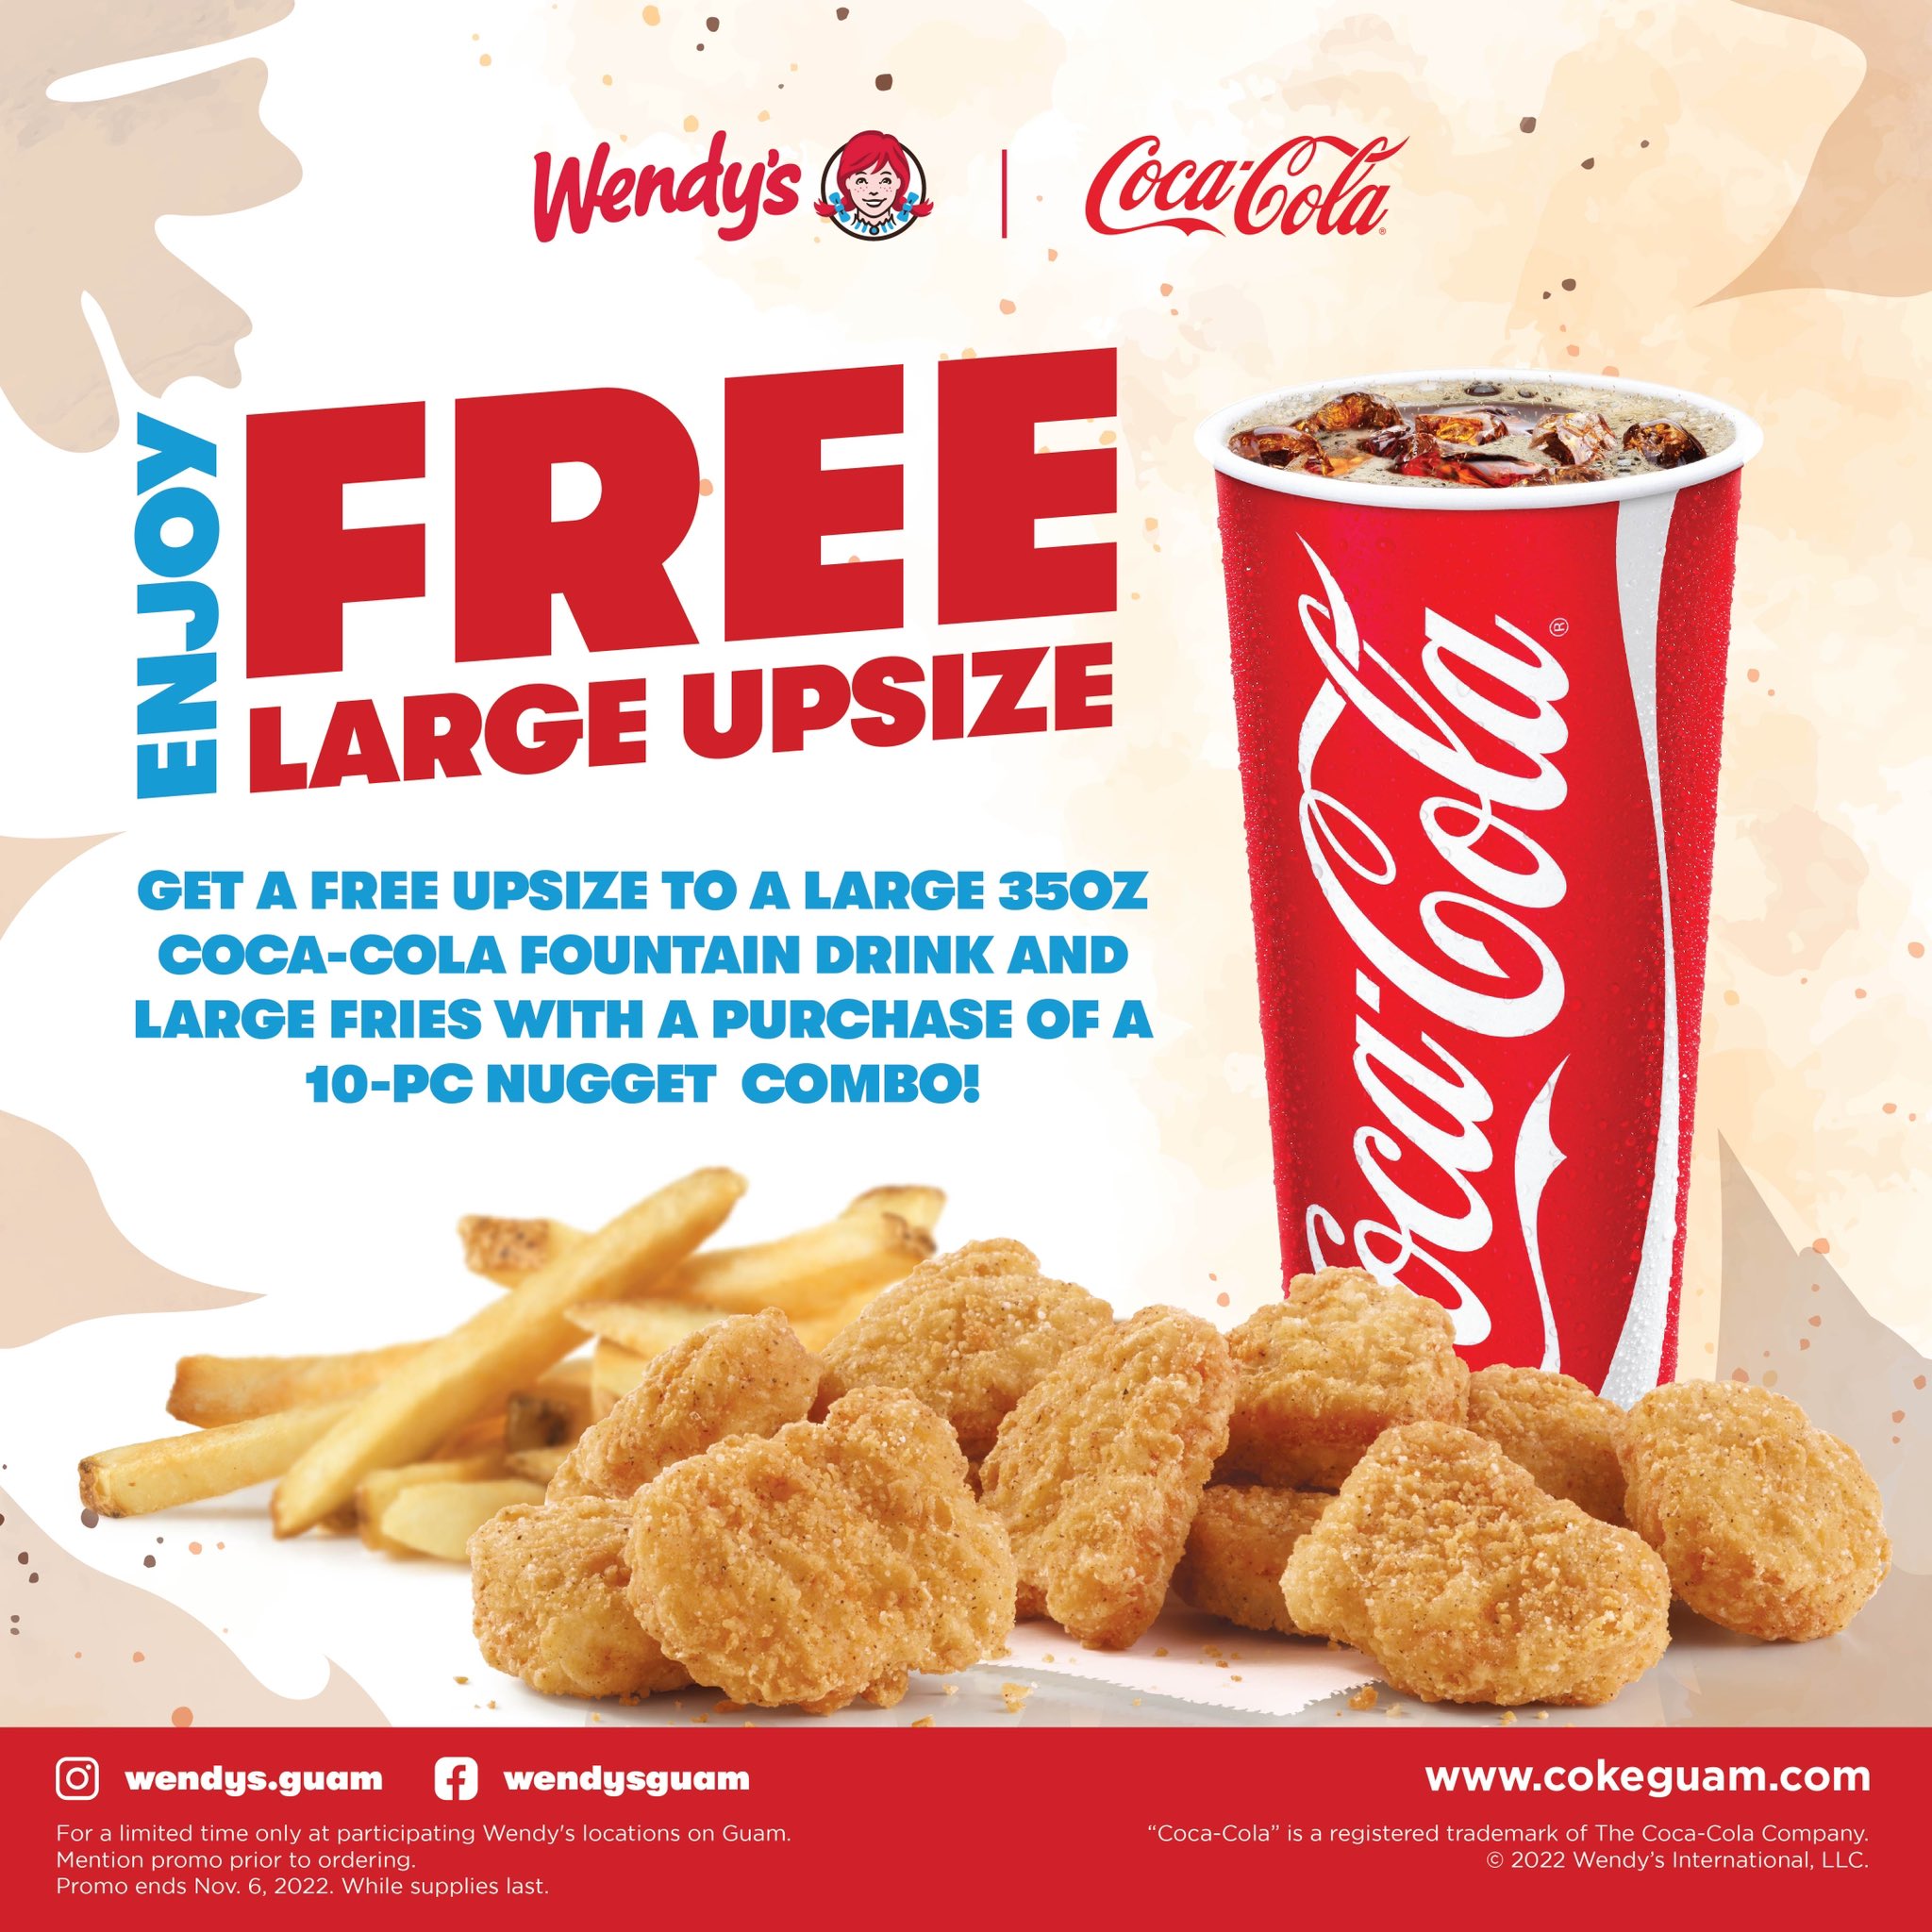 Wendy’s Promo Alert: FREE Large Upsize Coco-Cola Drink & Fries